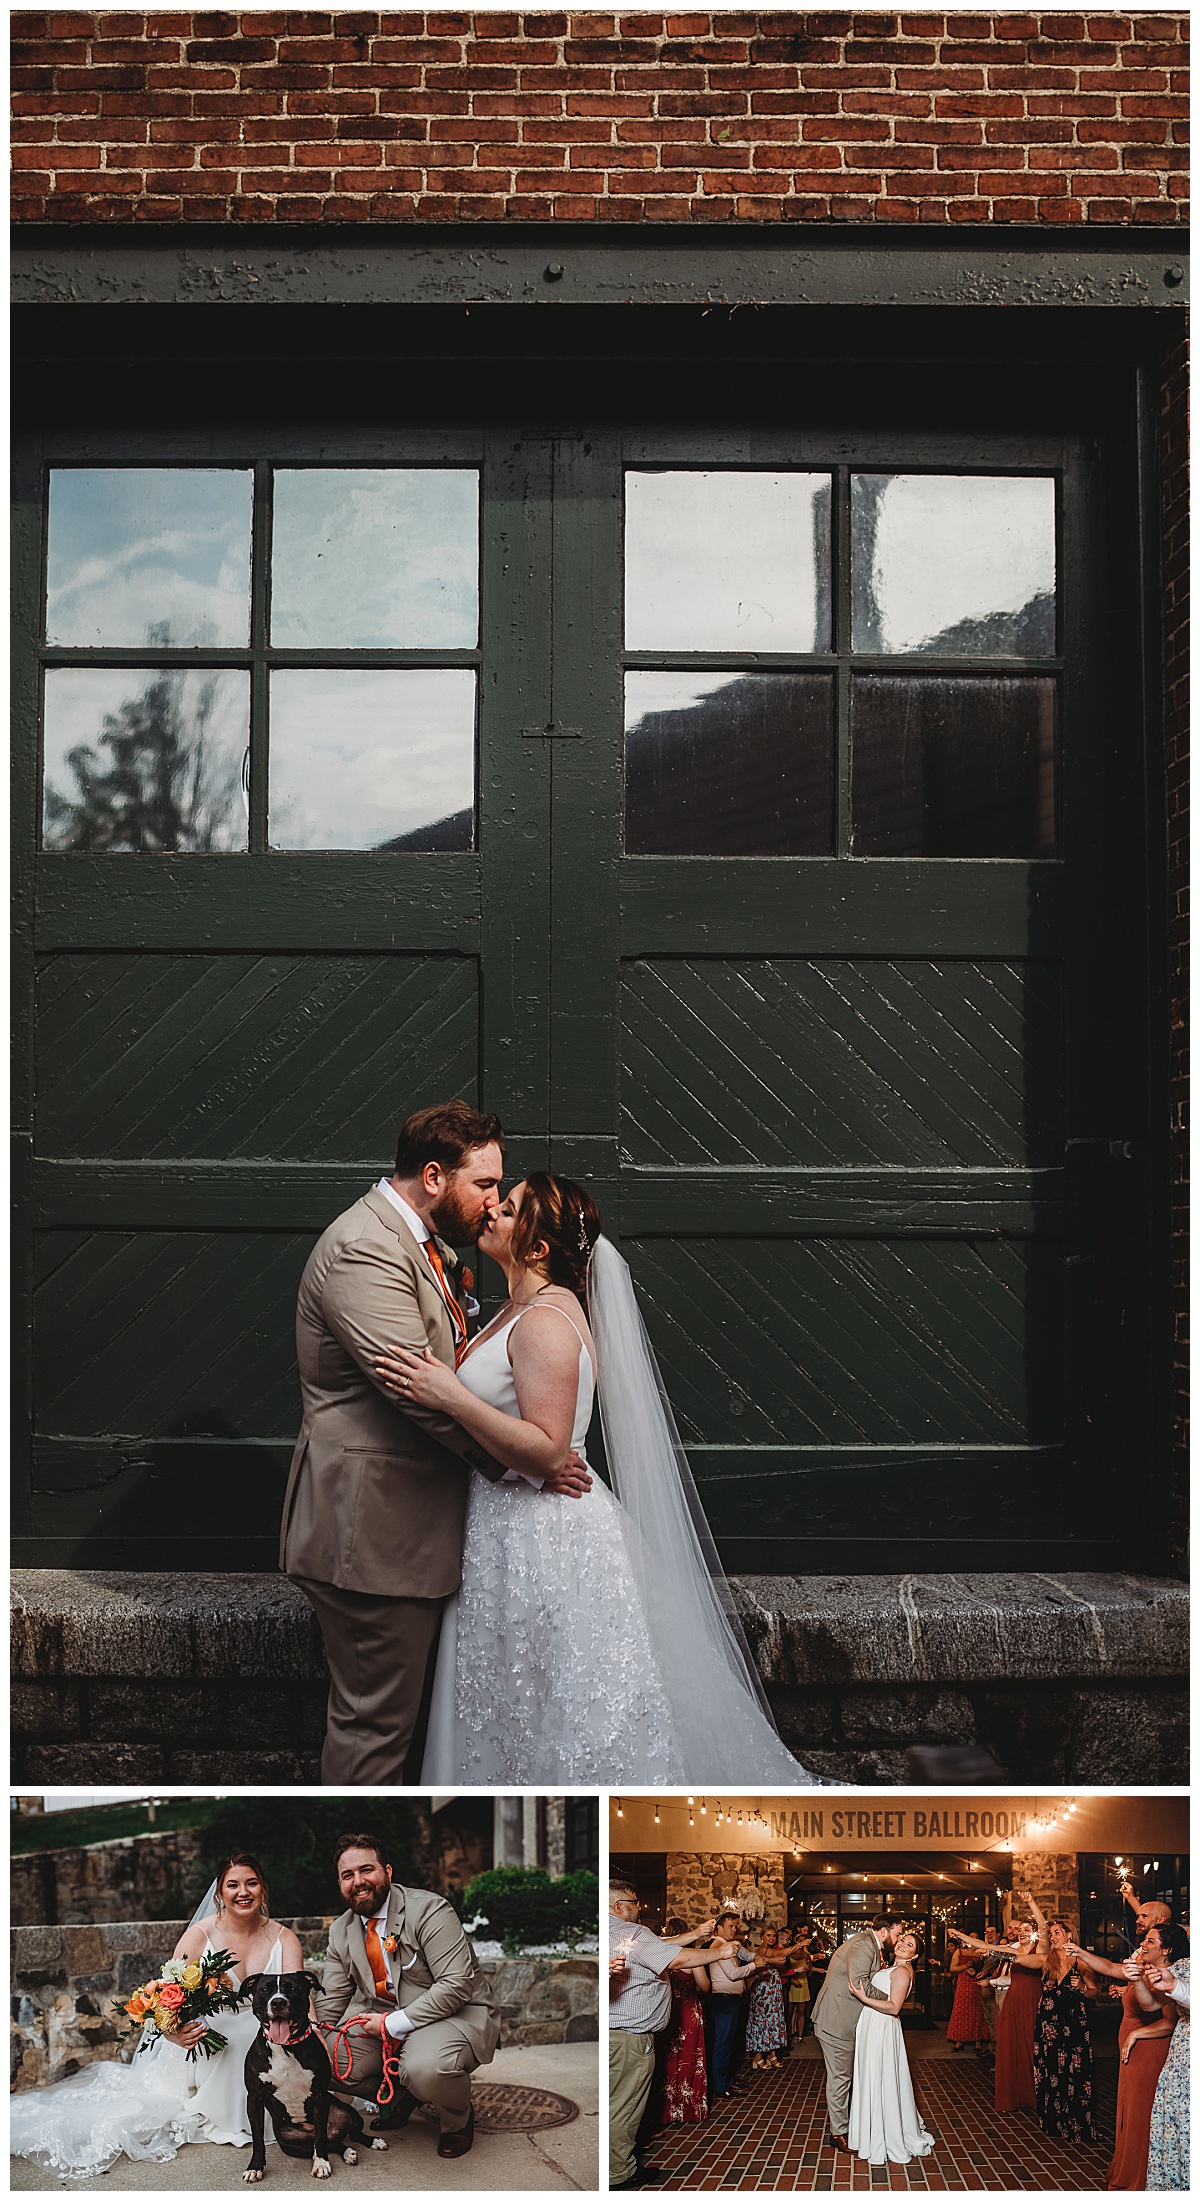 Bride and groom portraits with their dog at a summer wedding at Mainstreet Ballroom captured by Brittany Dunbar Photography, an Ellicott City Wedding Photographer.